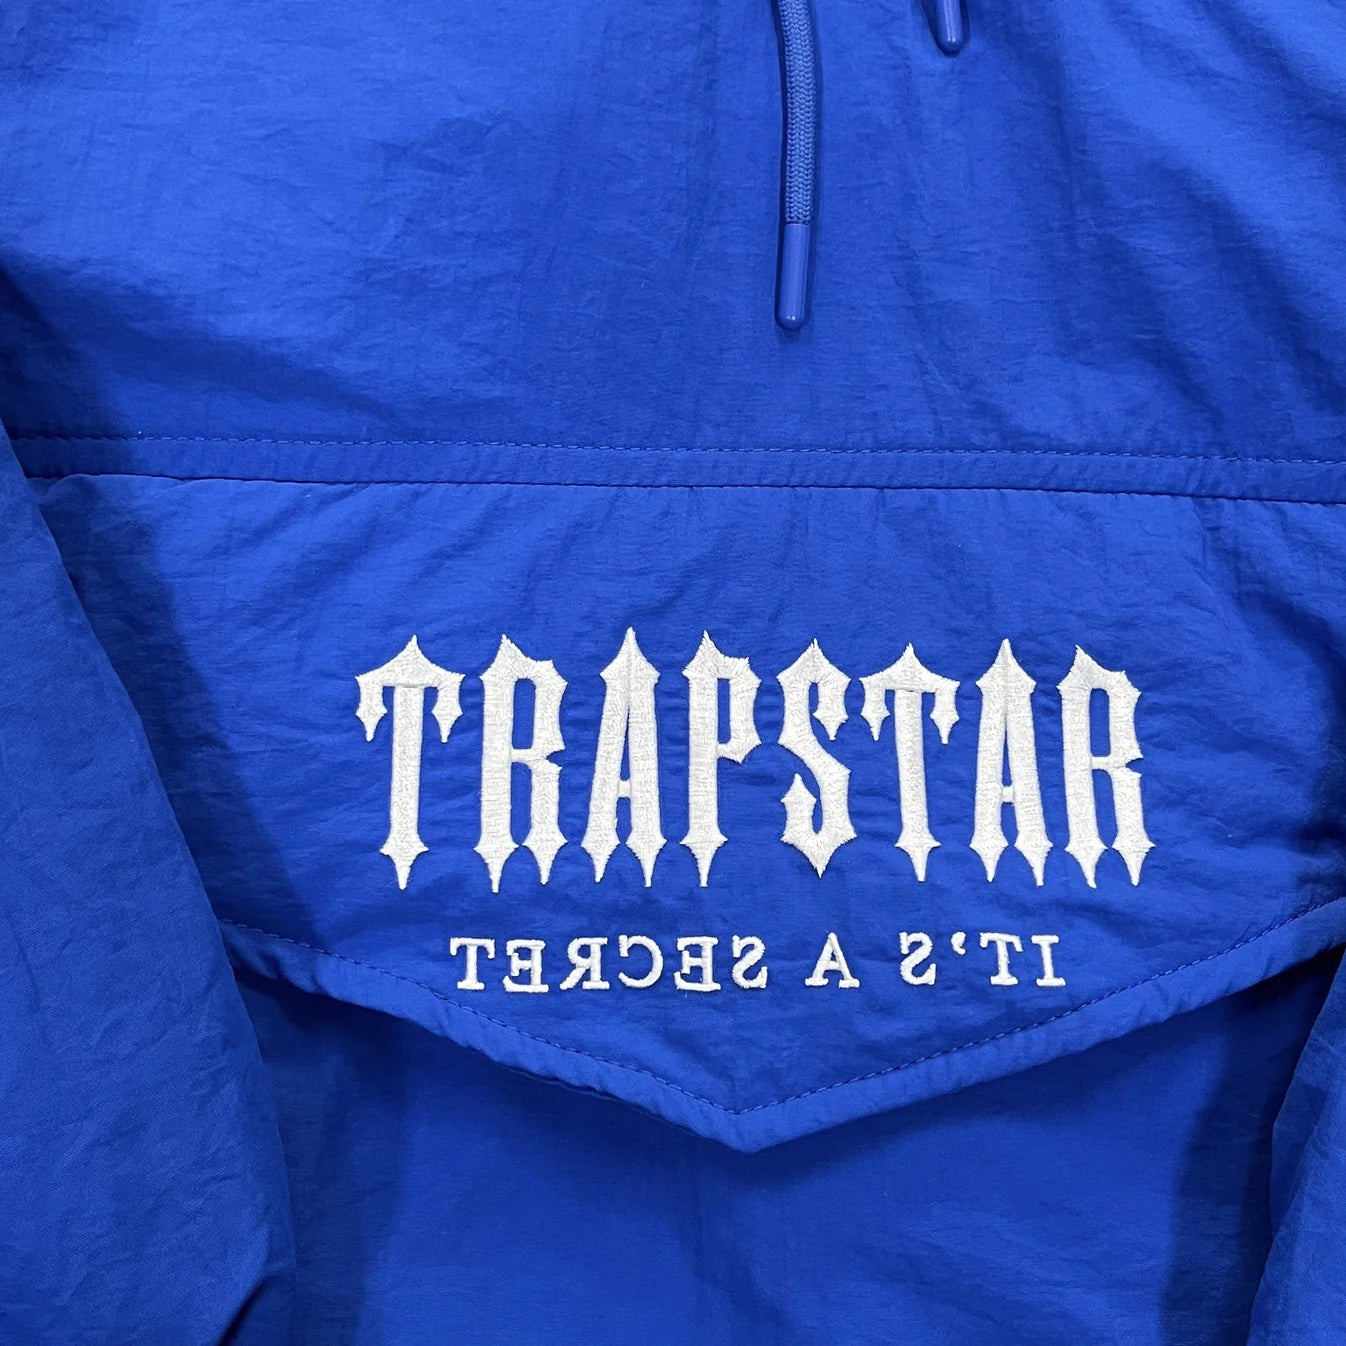 TRAPSTAR SHOOTERS 1/4 ZIP PULLOVER JACKET